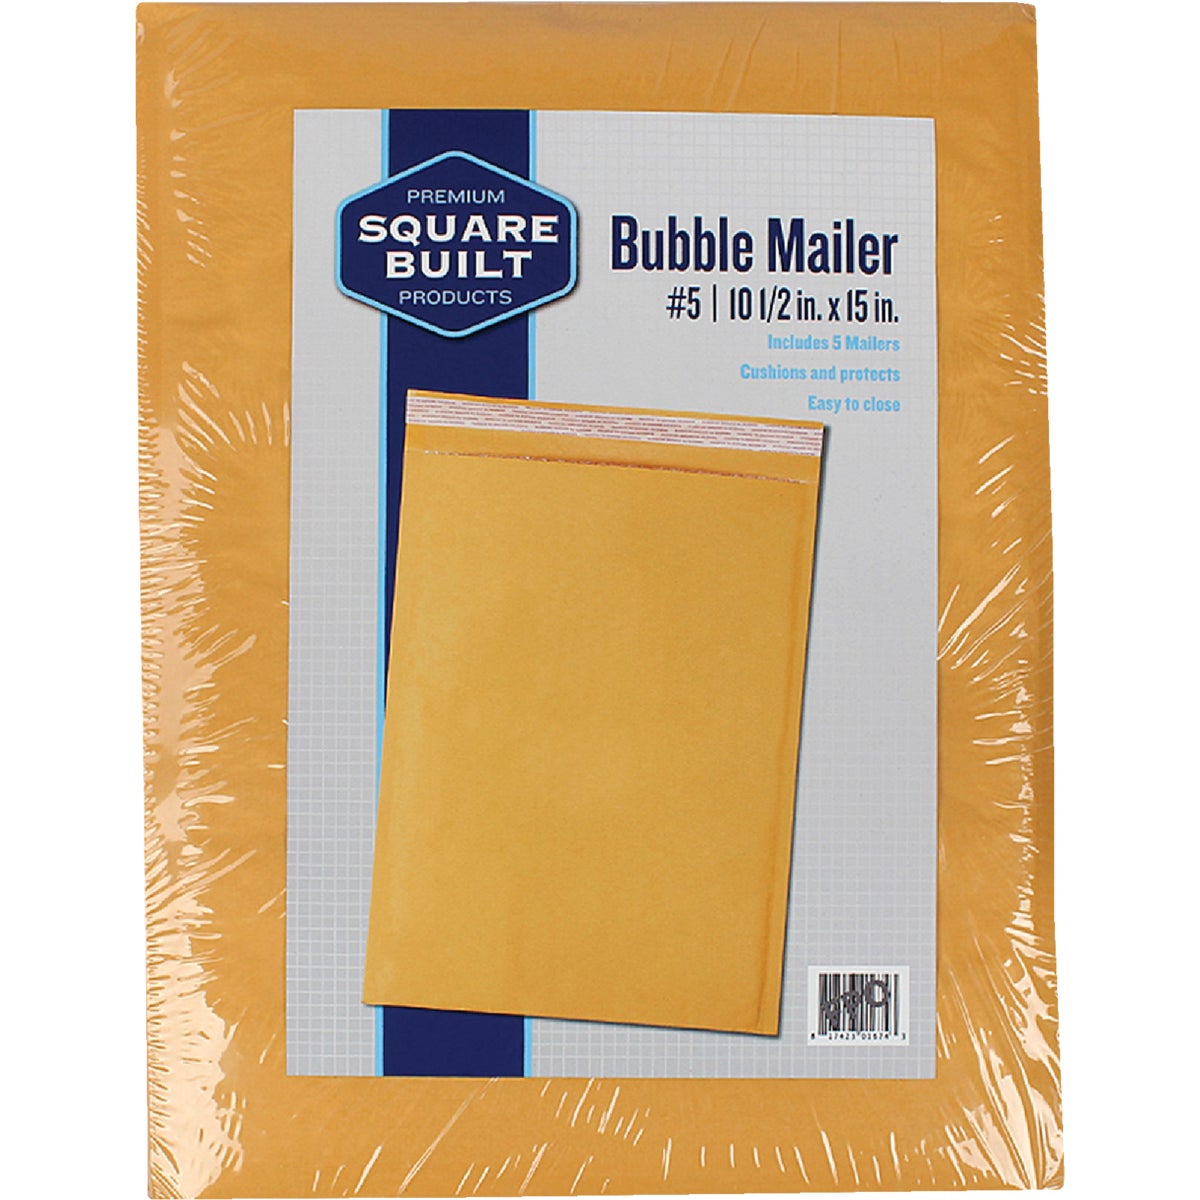 Item 970226, Square Built bubble mailers protects fragile items in the mail.